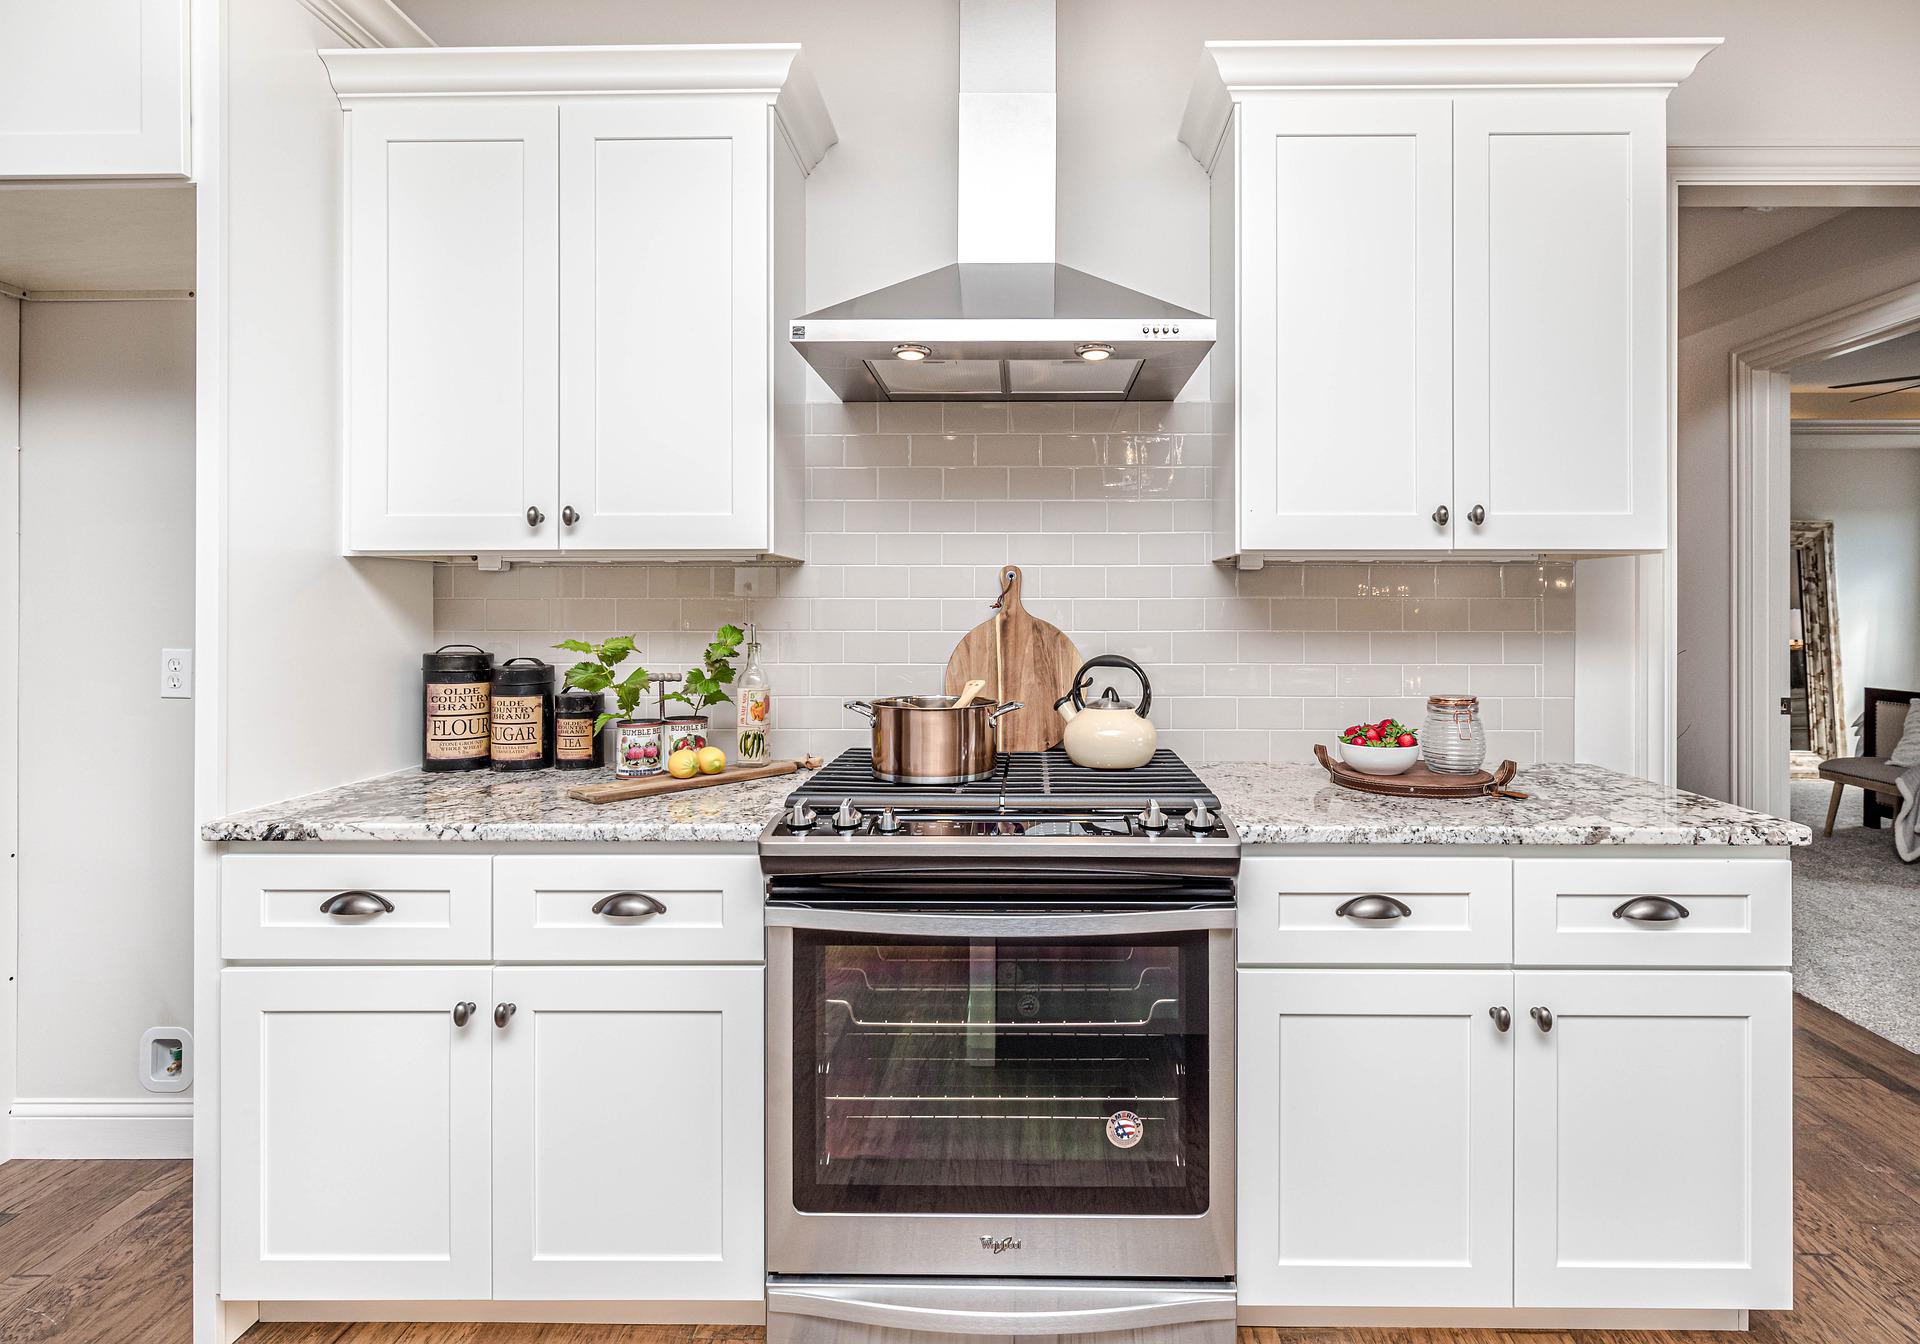 Do You Need an Extractor Hood in Your Kitchen?